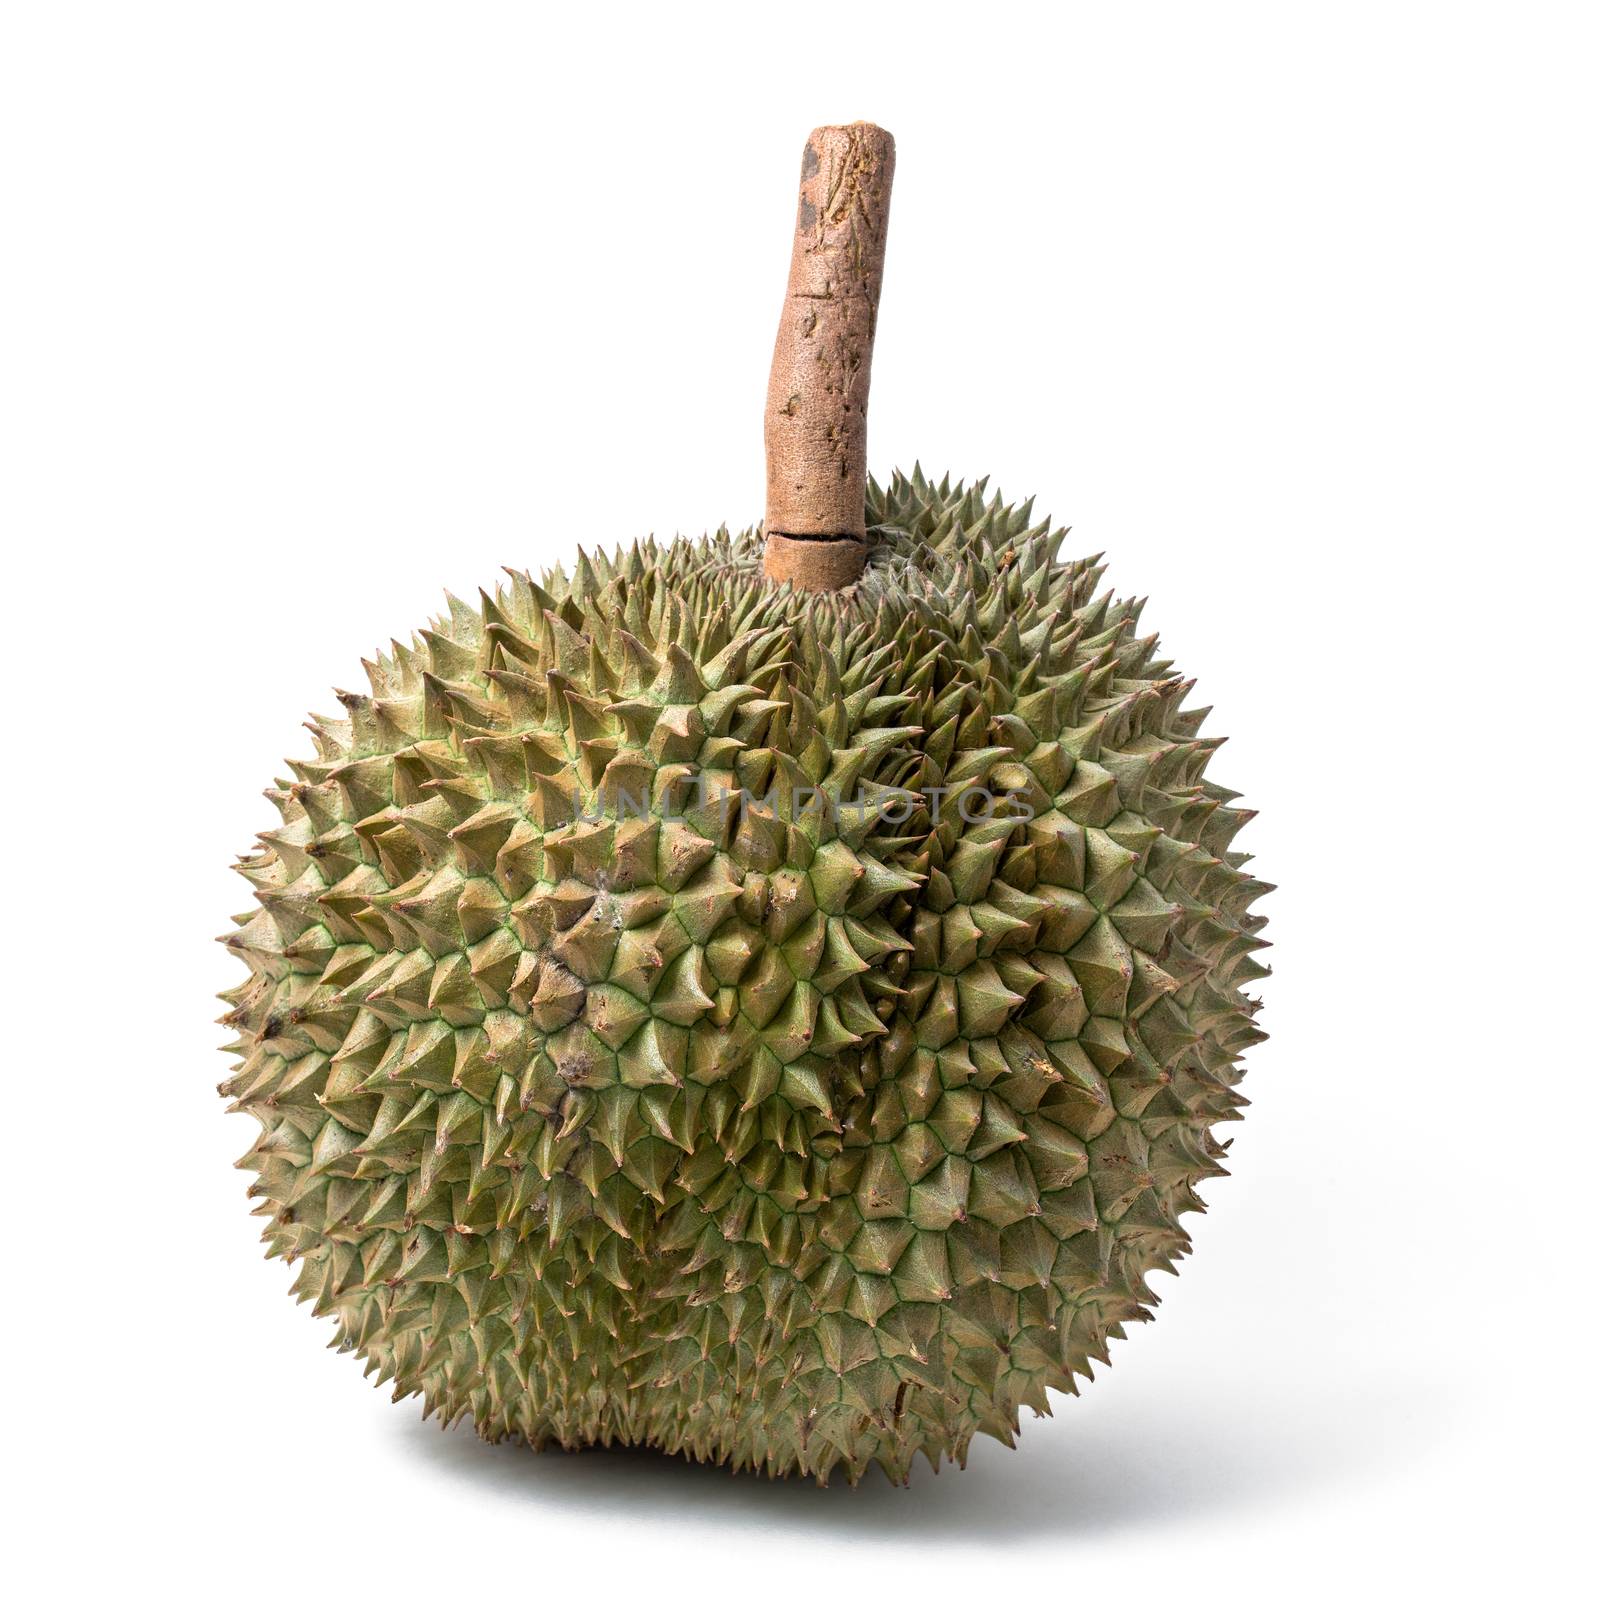 durian by antpkr